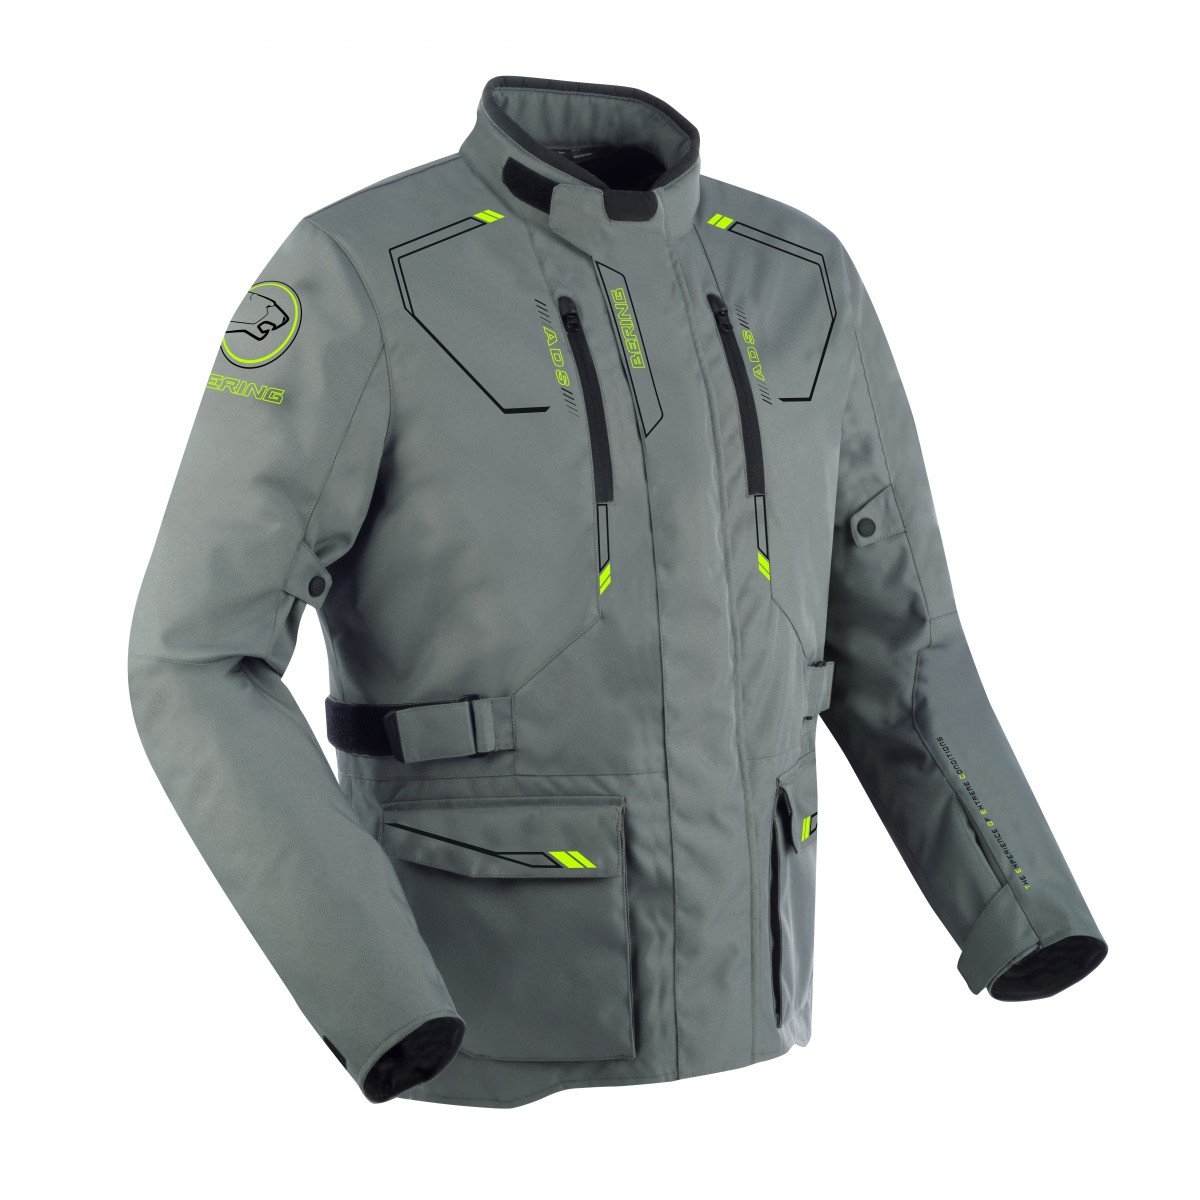 Image of Bering Voyager Jacket Gray Size 3XL ID 3660815169582